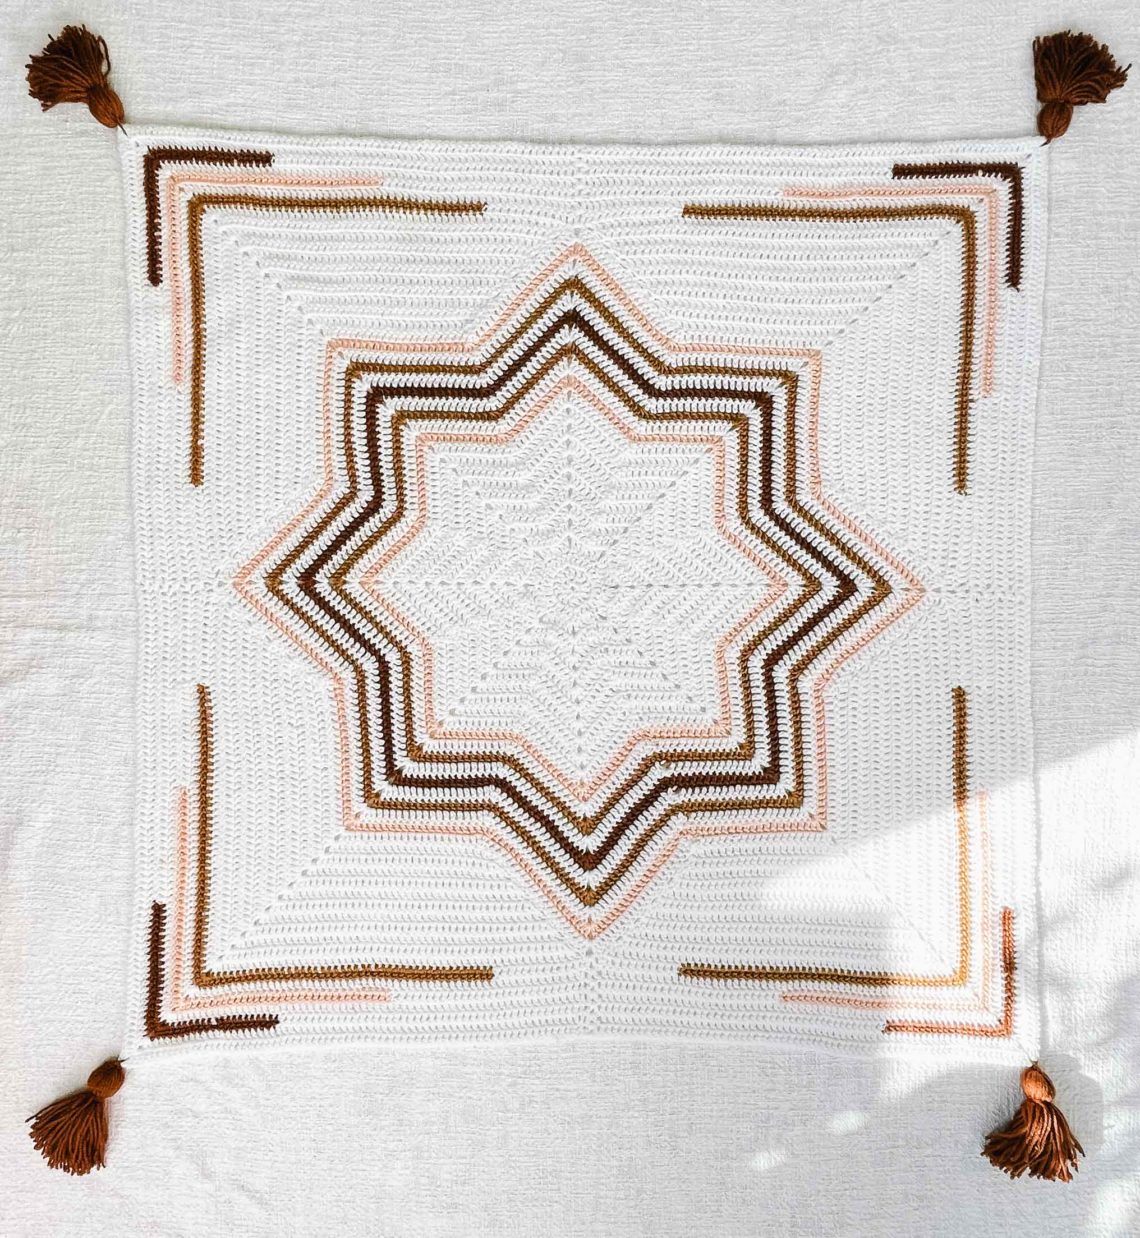 A crochet star baby blanket that has been squared off laying flat on the floor.